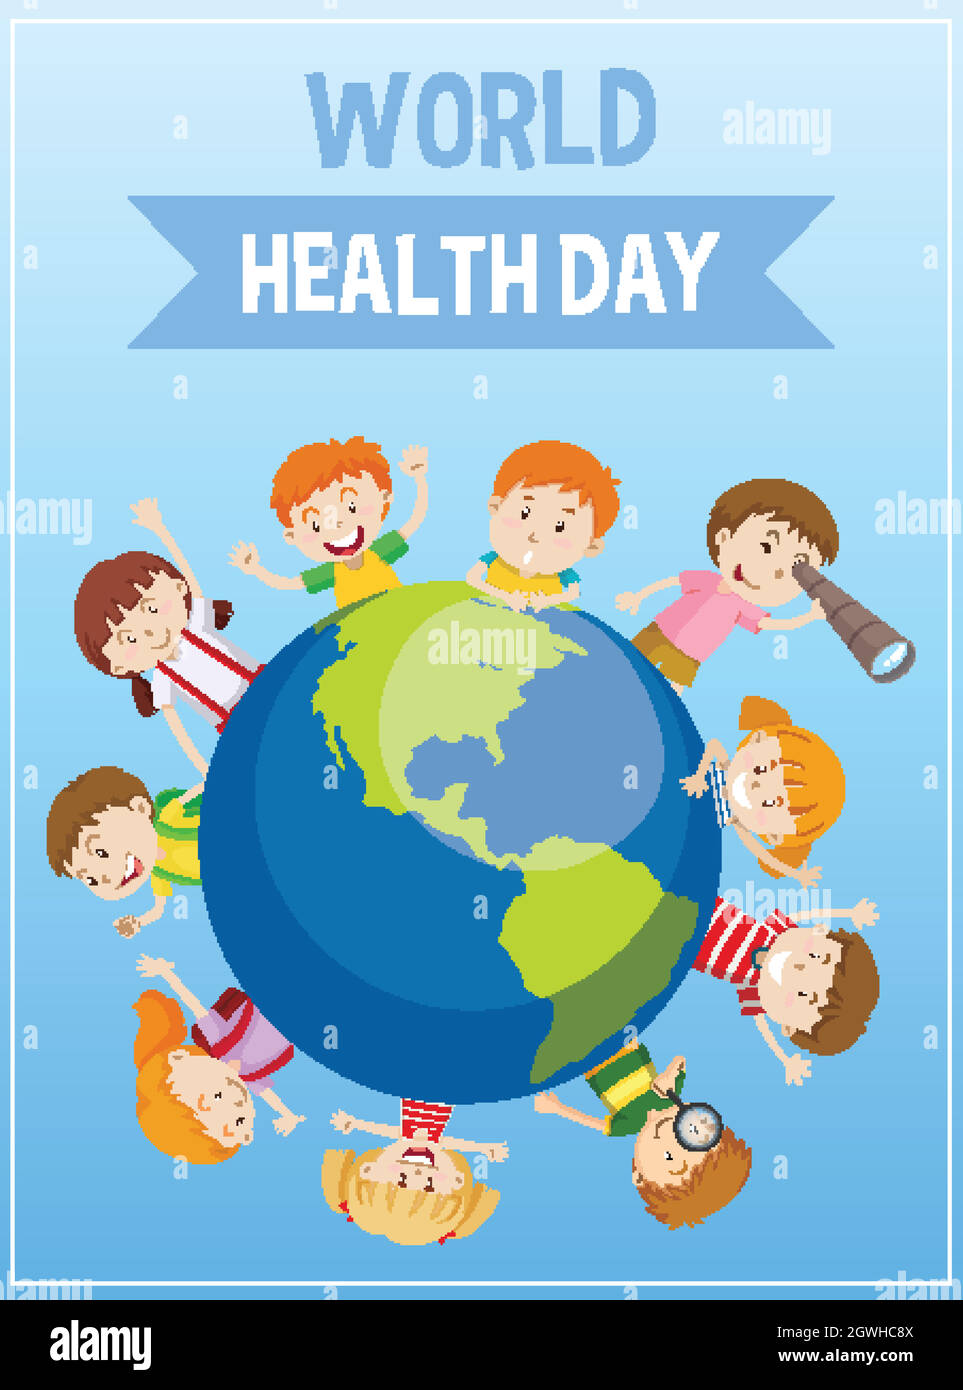 https://c8.alamy.com/comp/2GWHC8X/poster-design-for-mother-earth-day-with-happy-children-on-earth-2GWHC8X.jpg